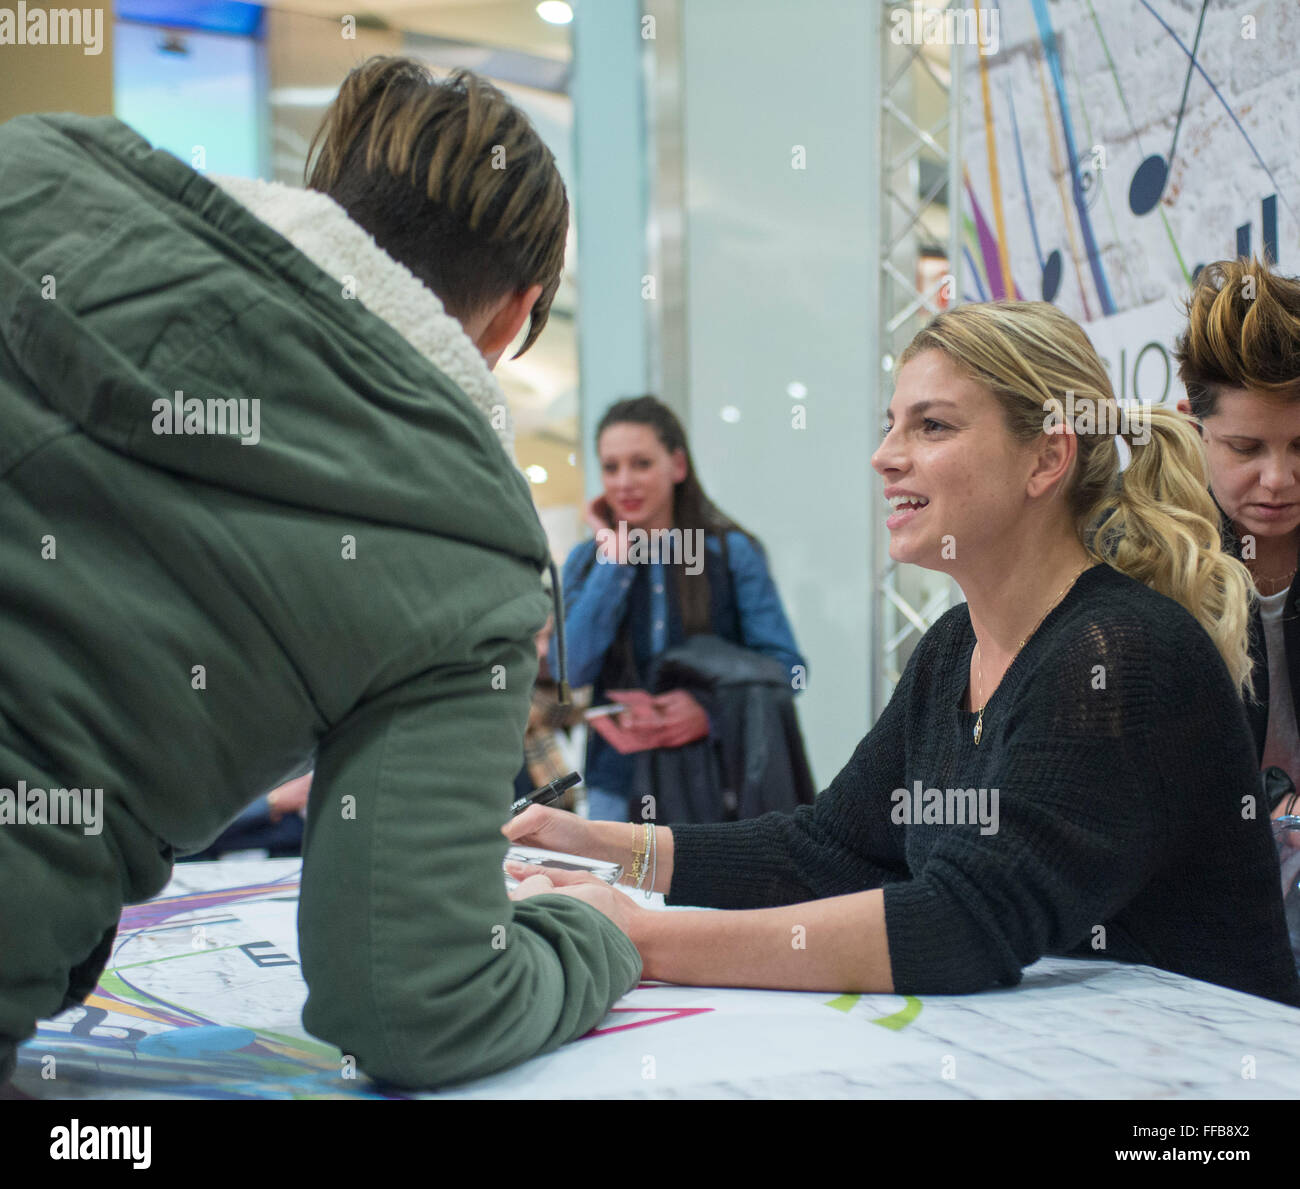 Turin, Italy. 11th February, 2016. Emma Marrone signs autographs during the presentation of 'Adesso' on February 11, 2016 in Turin. Credit:  Stefano Guidi/Alamy Live News Stock Photo